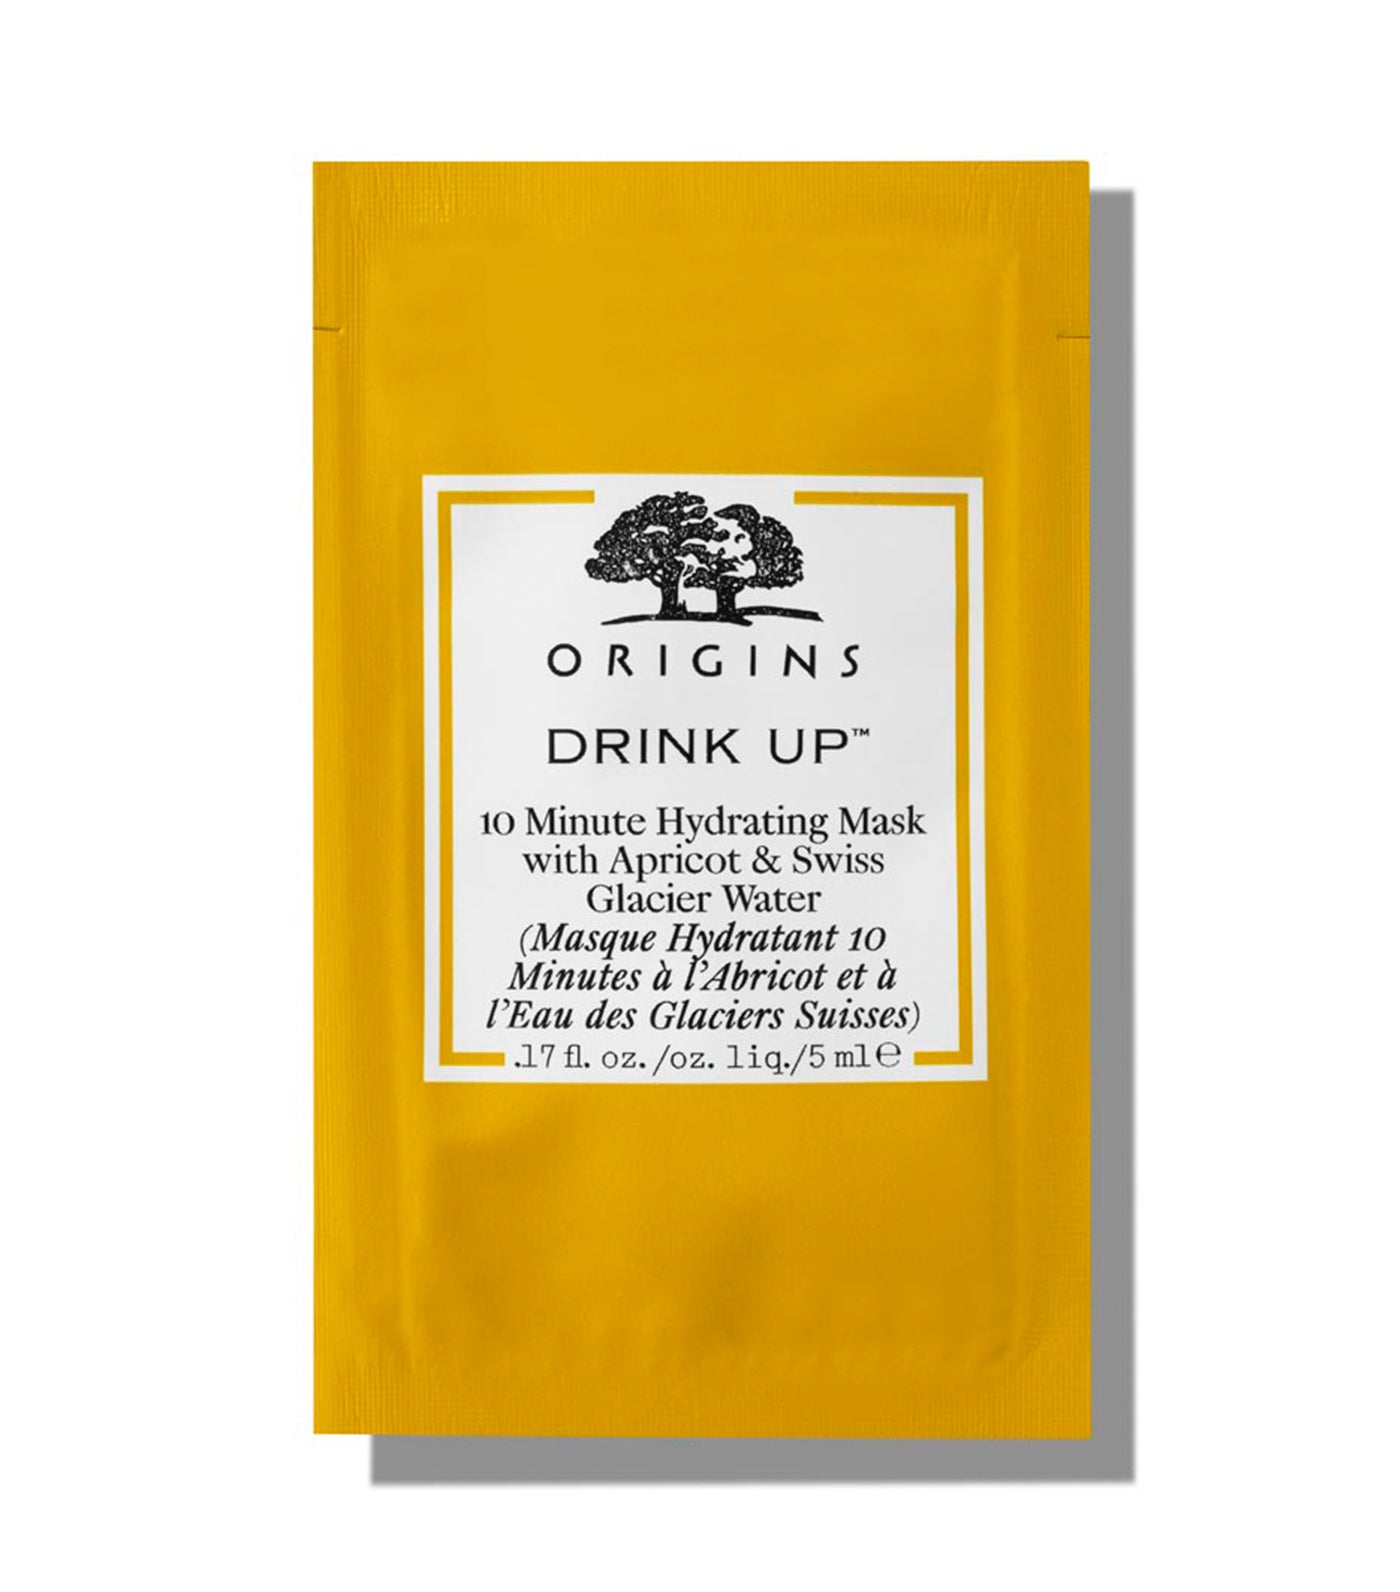 Free DRINK UP™ 10 Minute Hydrating Mask With Apricot & Swiss Glacier Water 5ml